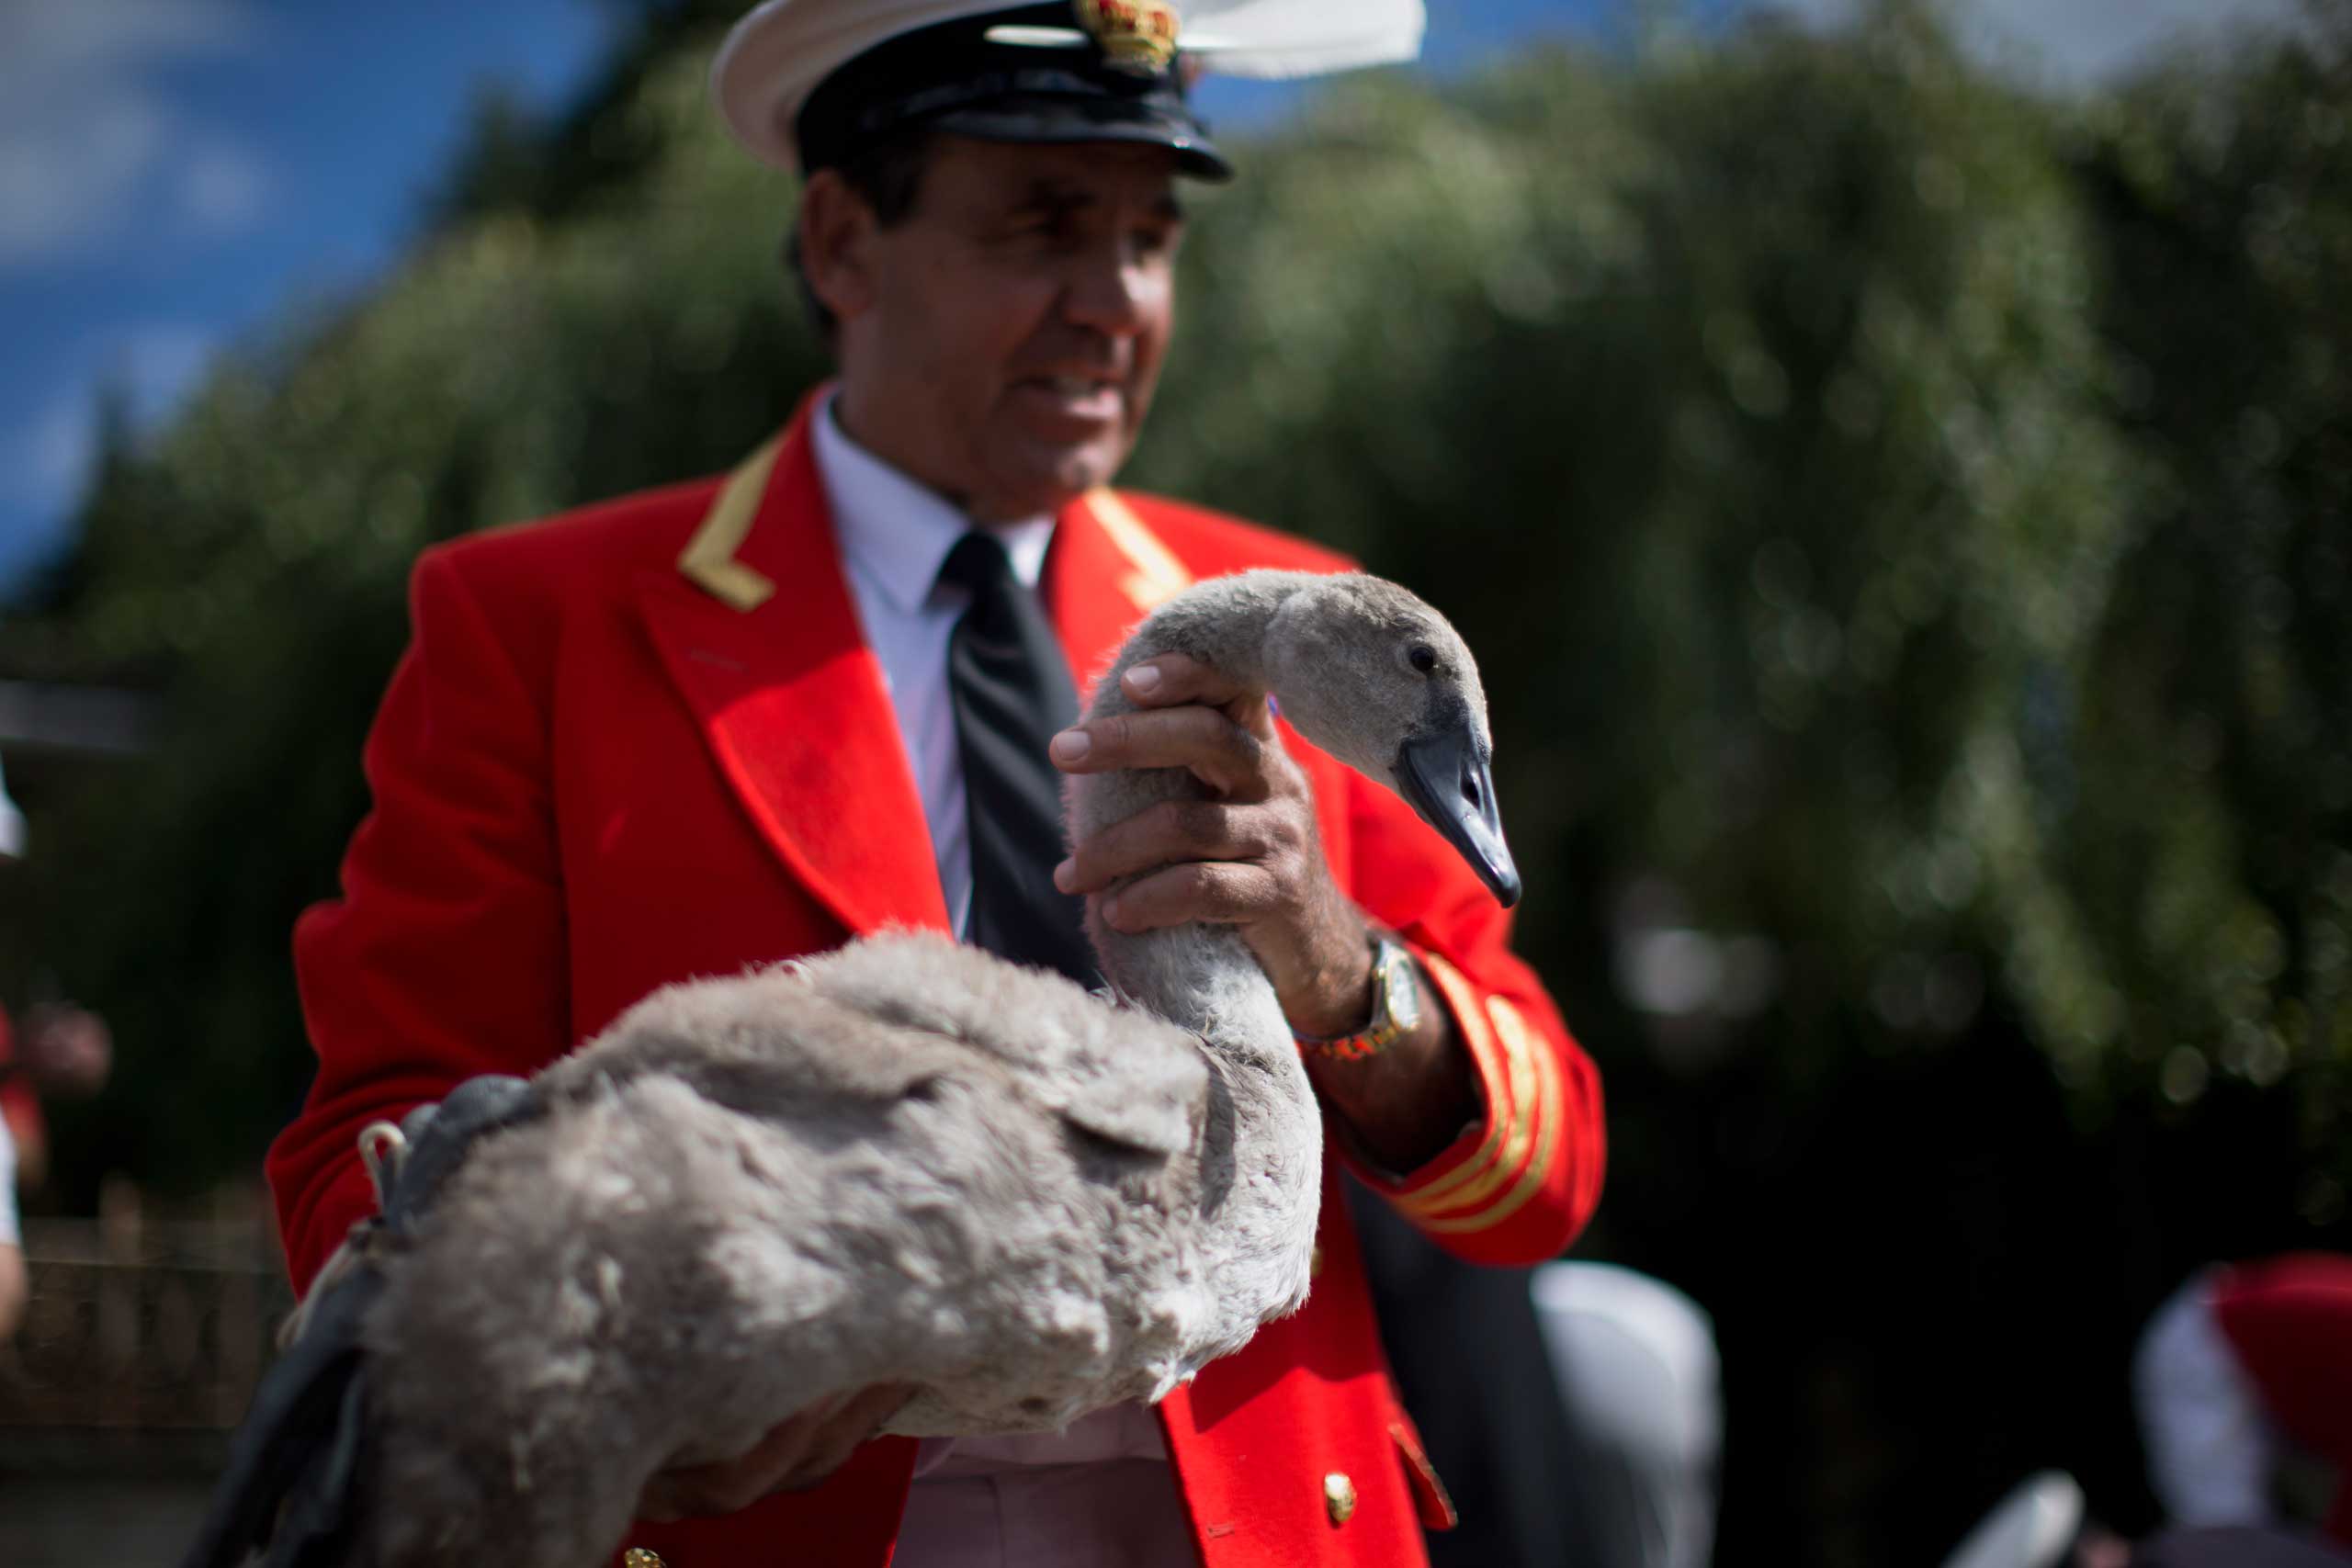 The Queen's Swan Marker David Barber holds a cygnet before releasing it back into the River Thames, after it was counted and checked during the annual "Swan Upping" census in  July 2014. (Matt Dunham—AP)